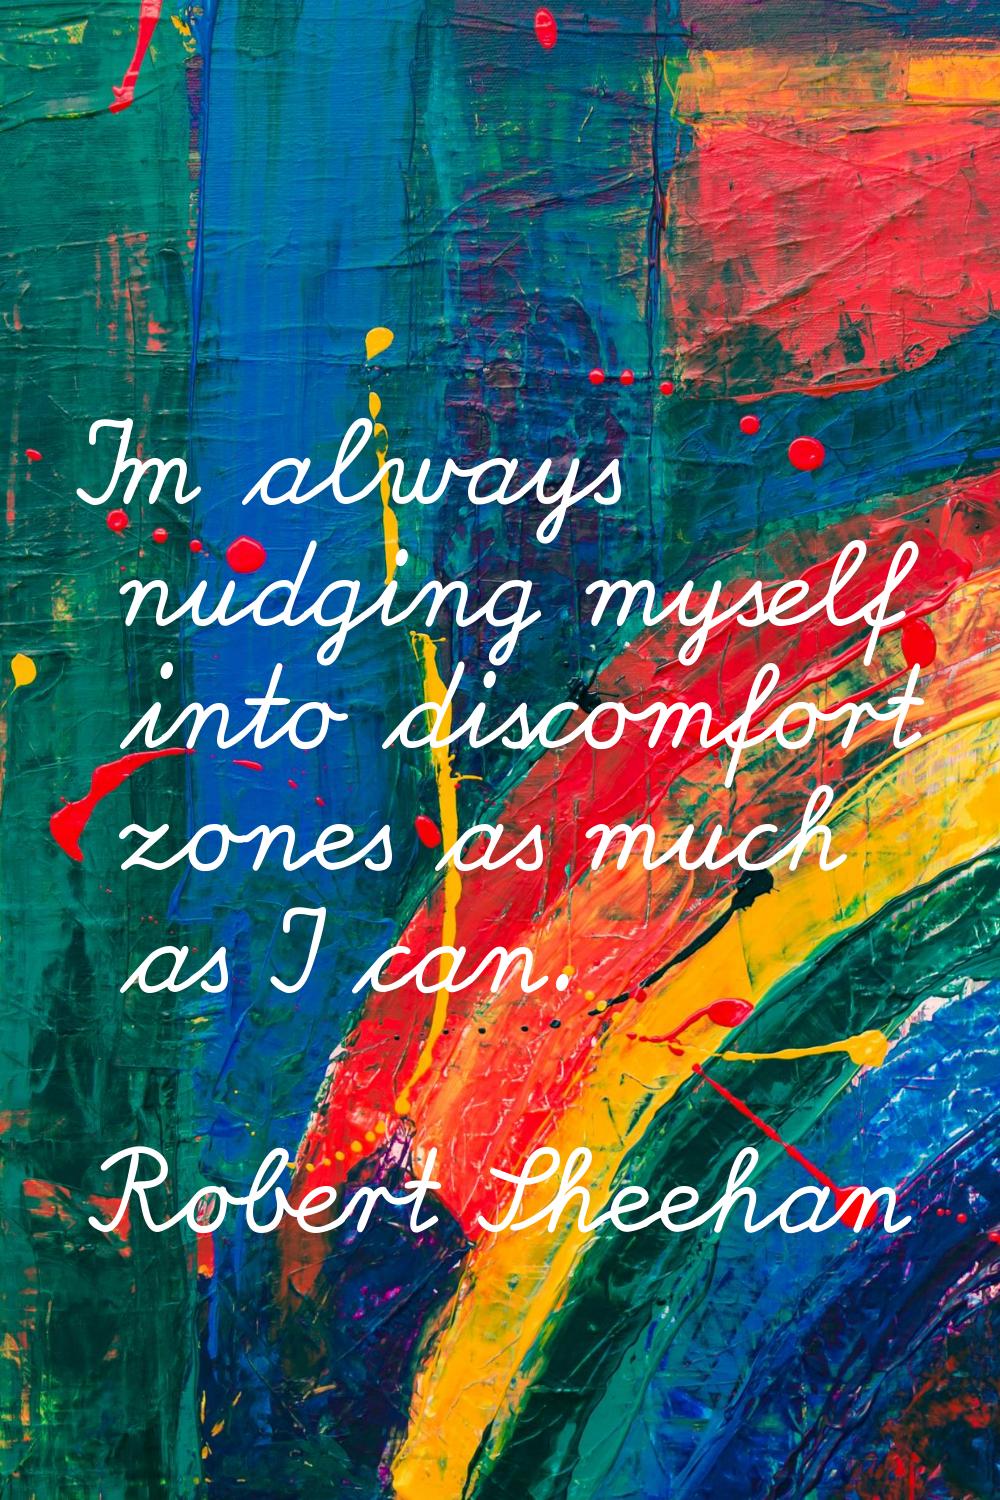 I'm always nudging myself into discomfort zones as much as I can.